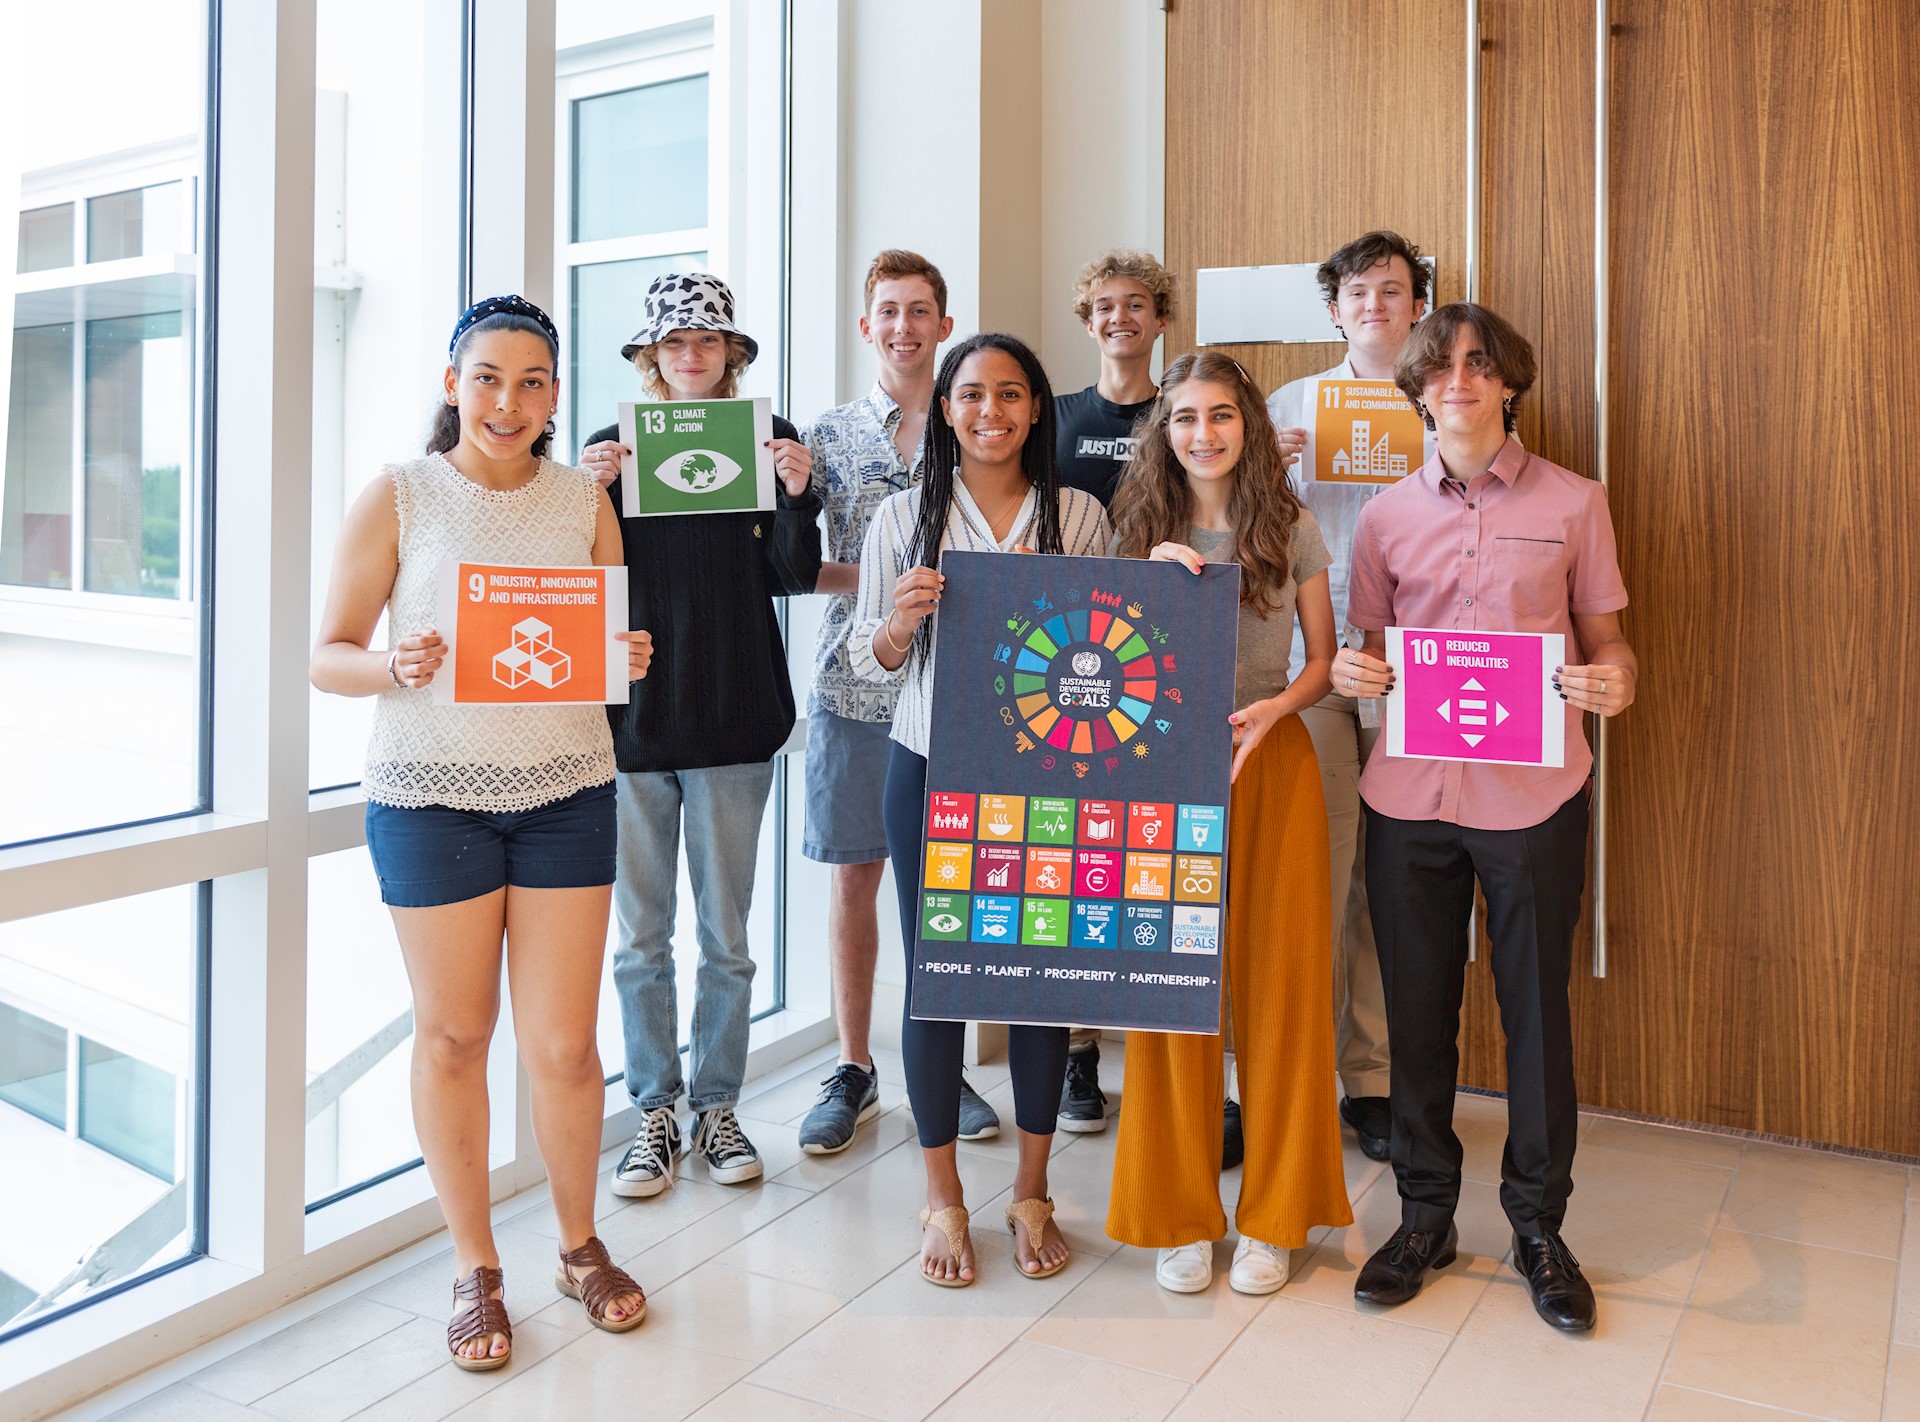 Students participate in pilot programme focusing of Sustainable Development Goals